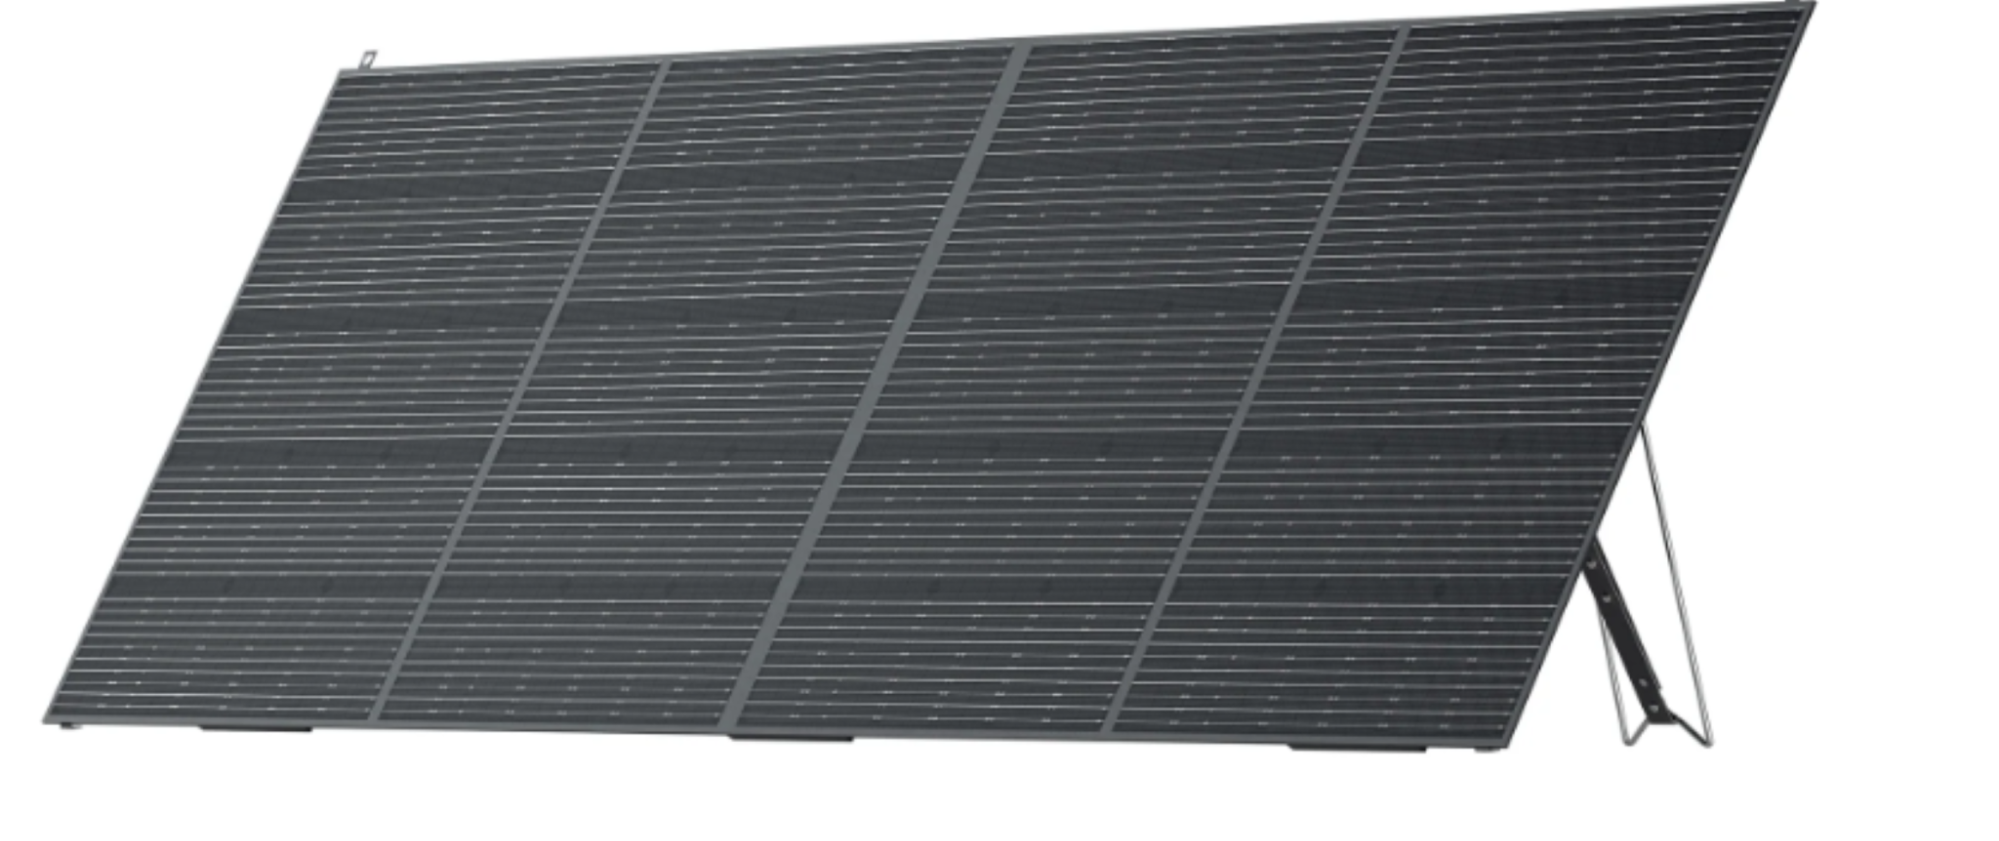 A New Era of Solar Energy: Is a 400W Solar Panel System Right for You?